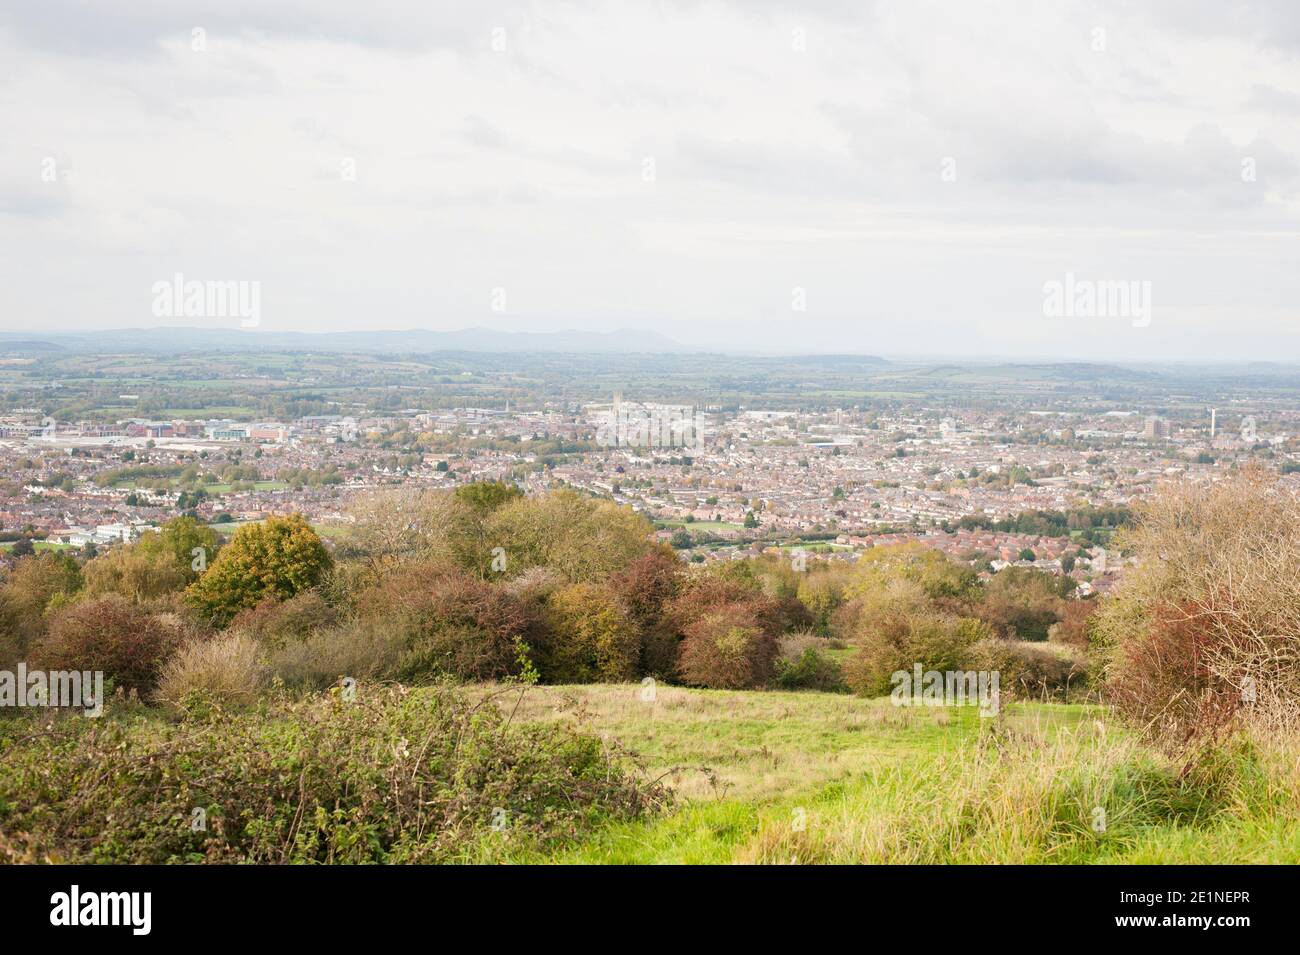 View across the city of Gloucester and beyond from the top of Robinswood Hill Country Park, Gloucester, England, UK Stock Photo